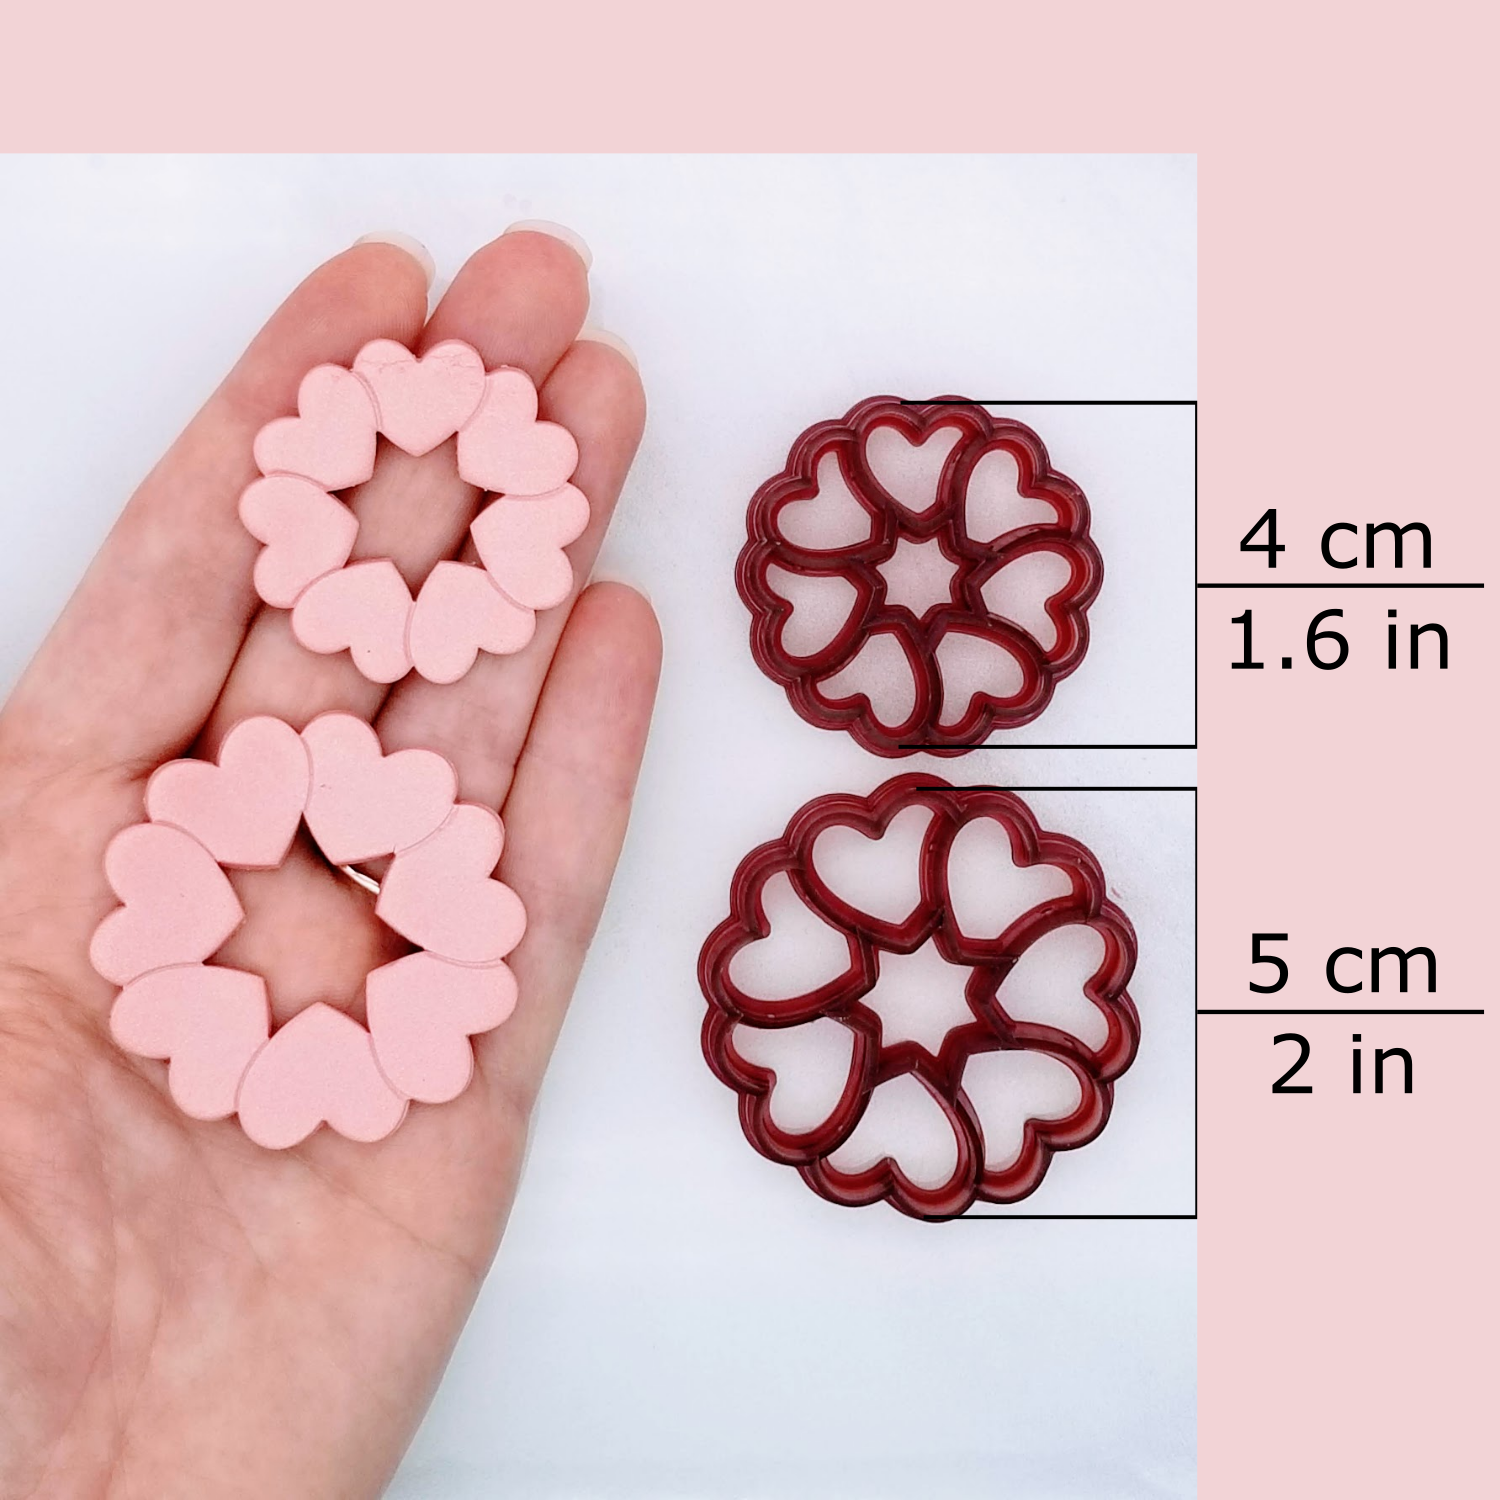 Ring of hearts clay cutter available sizes, 4 centimeters / 1.6 inches, and 5 centimeters / 2 inches